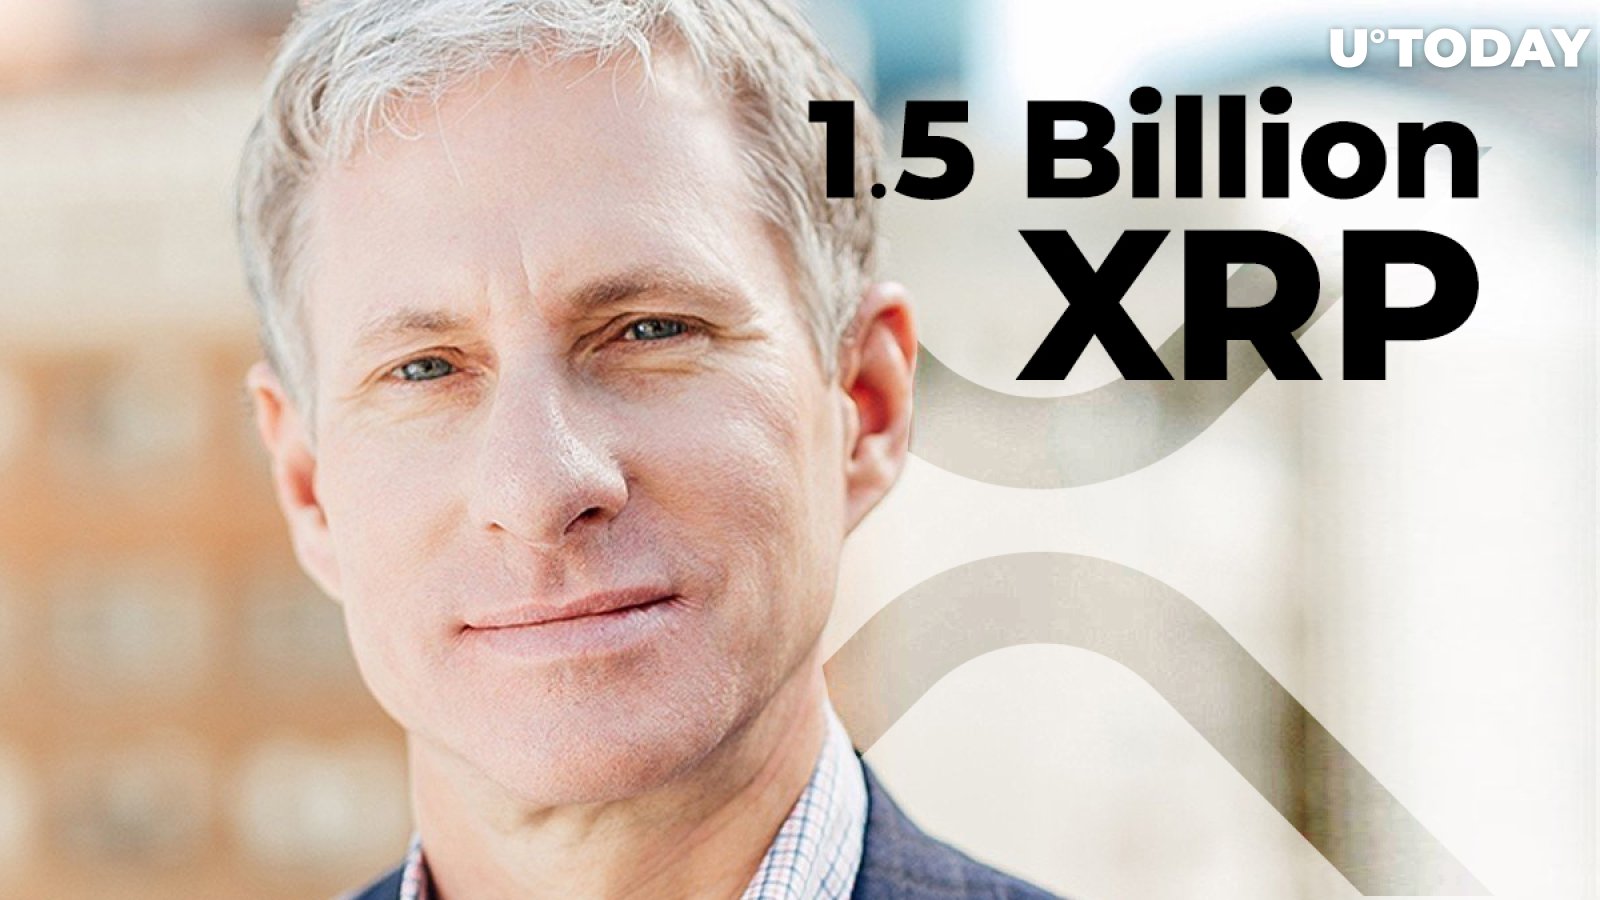 Ripple and Chris Larsen Shift Whopping 1.5 Billion XRP While Coin Holds at $0.65